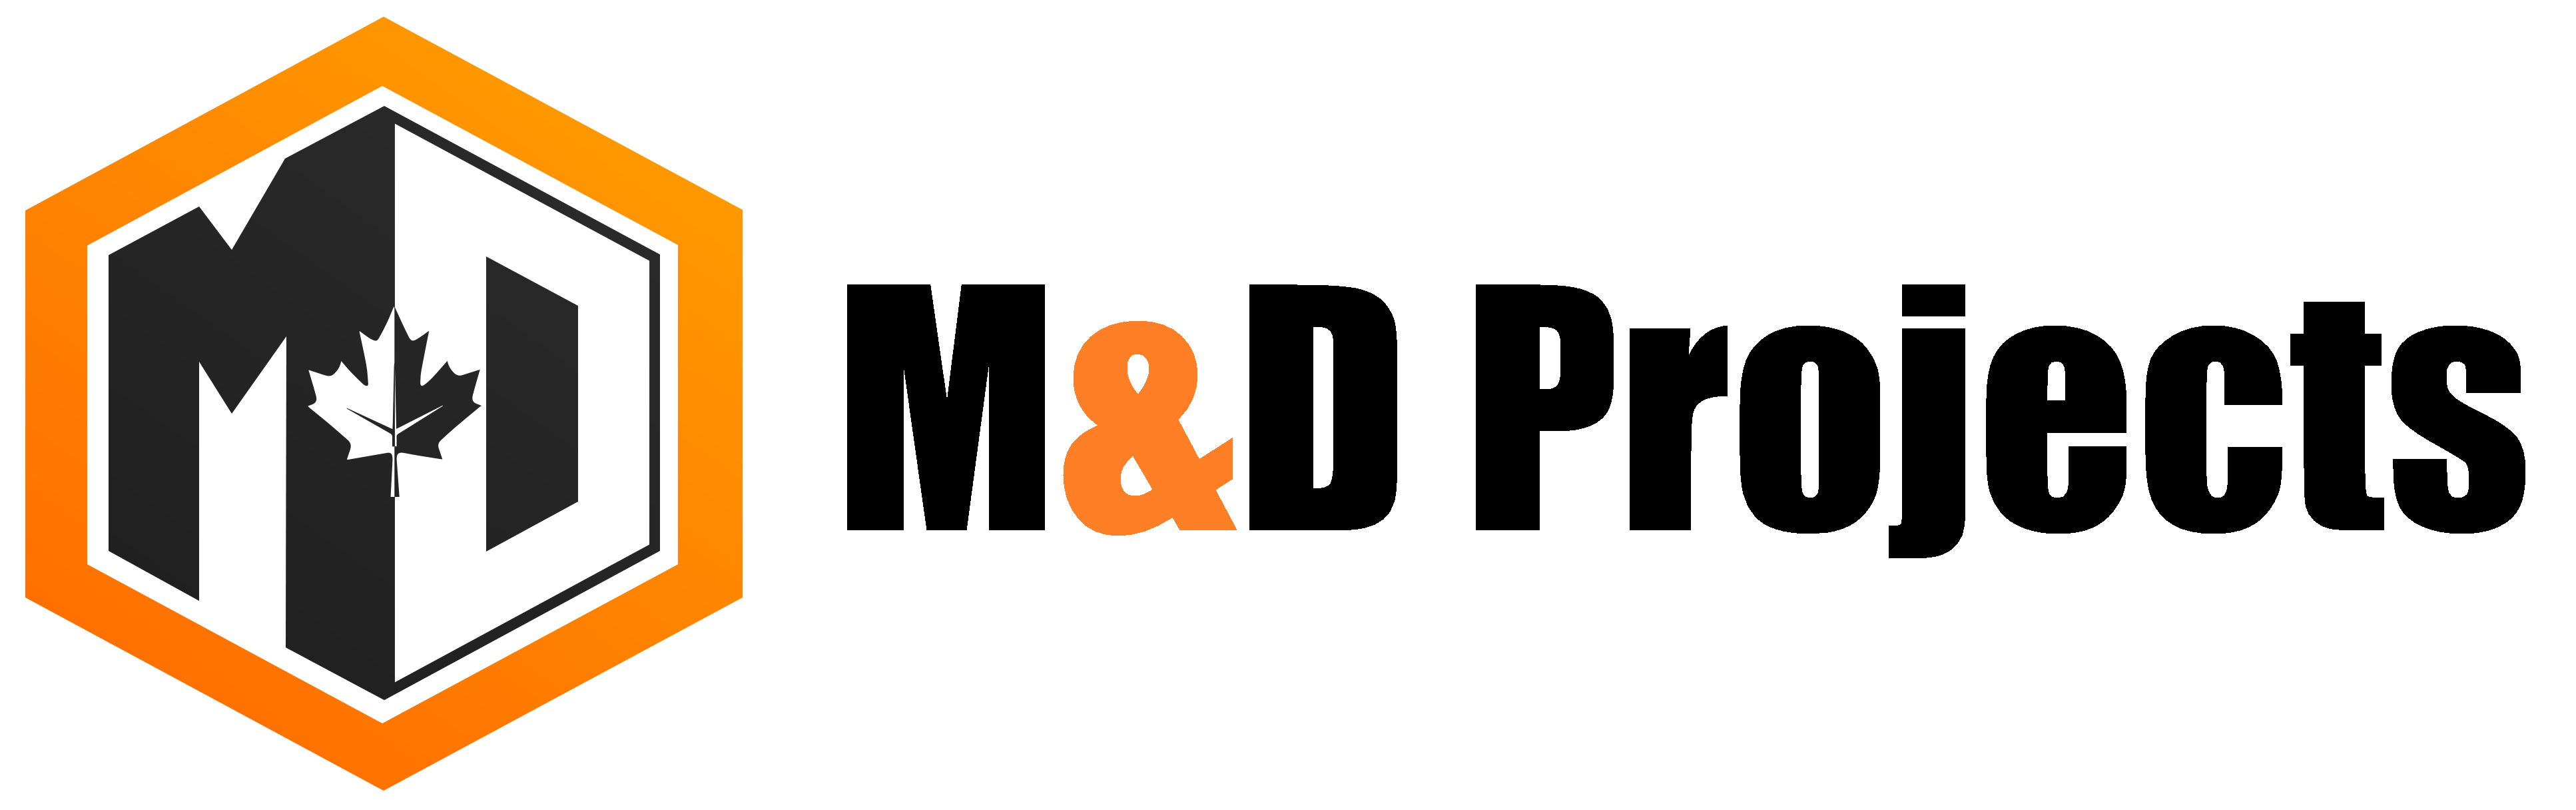 M&D Projects: Retail Store Maintenance and Facility Management – Nationwide  Retail Store Maintenance